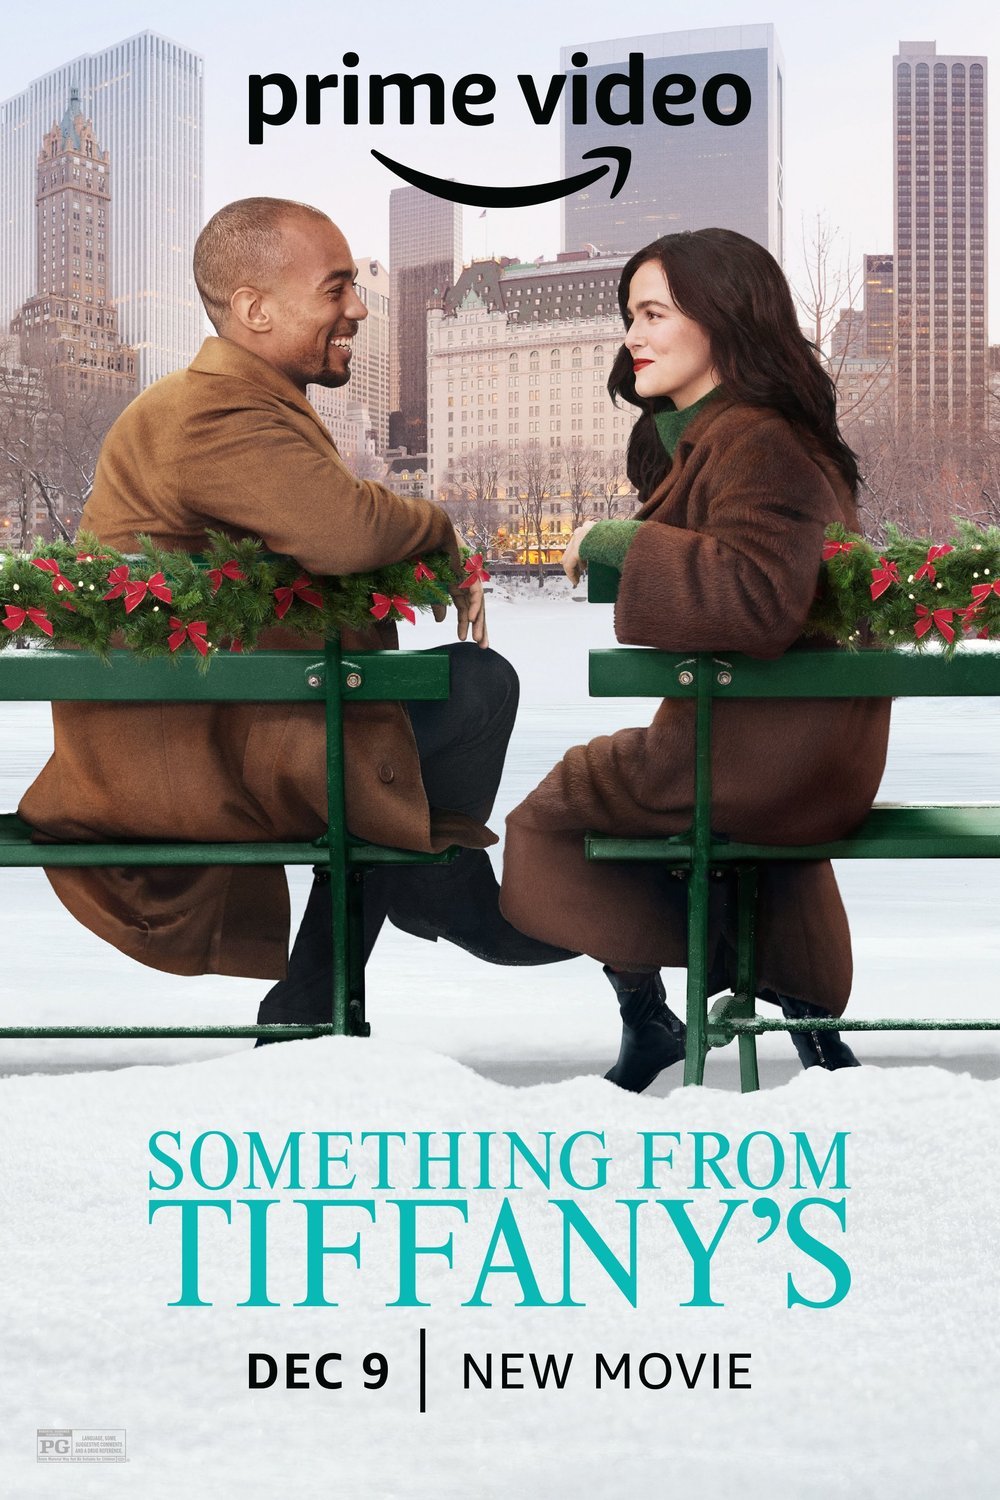 Poster of the movie Something from Tiffany's